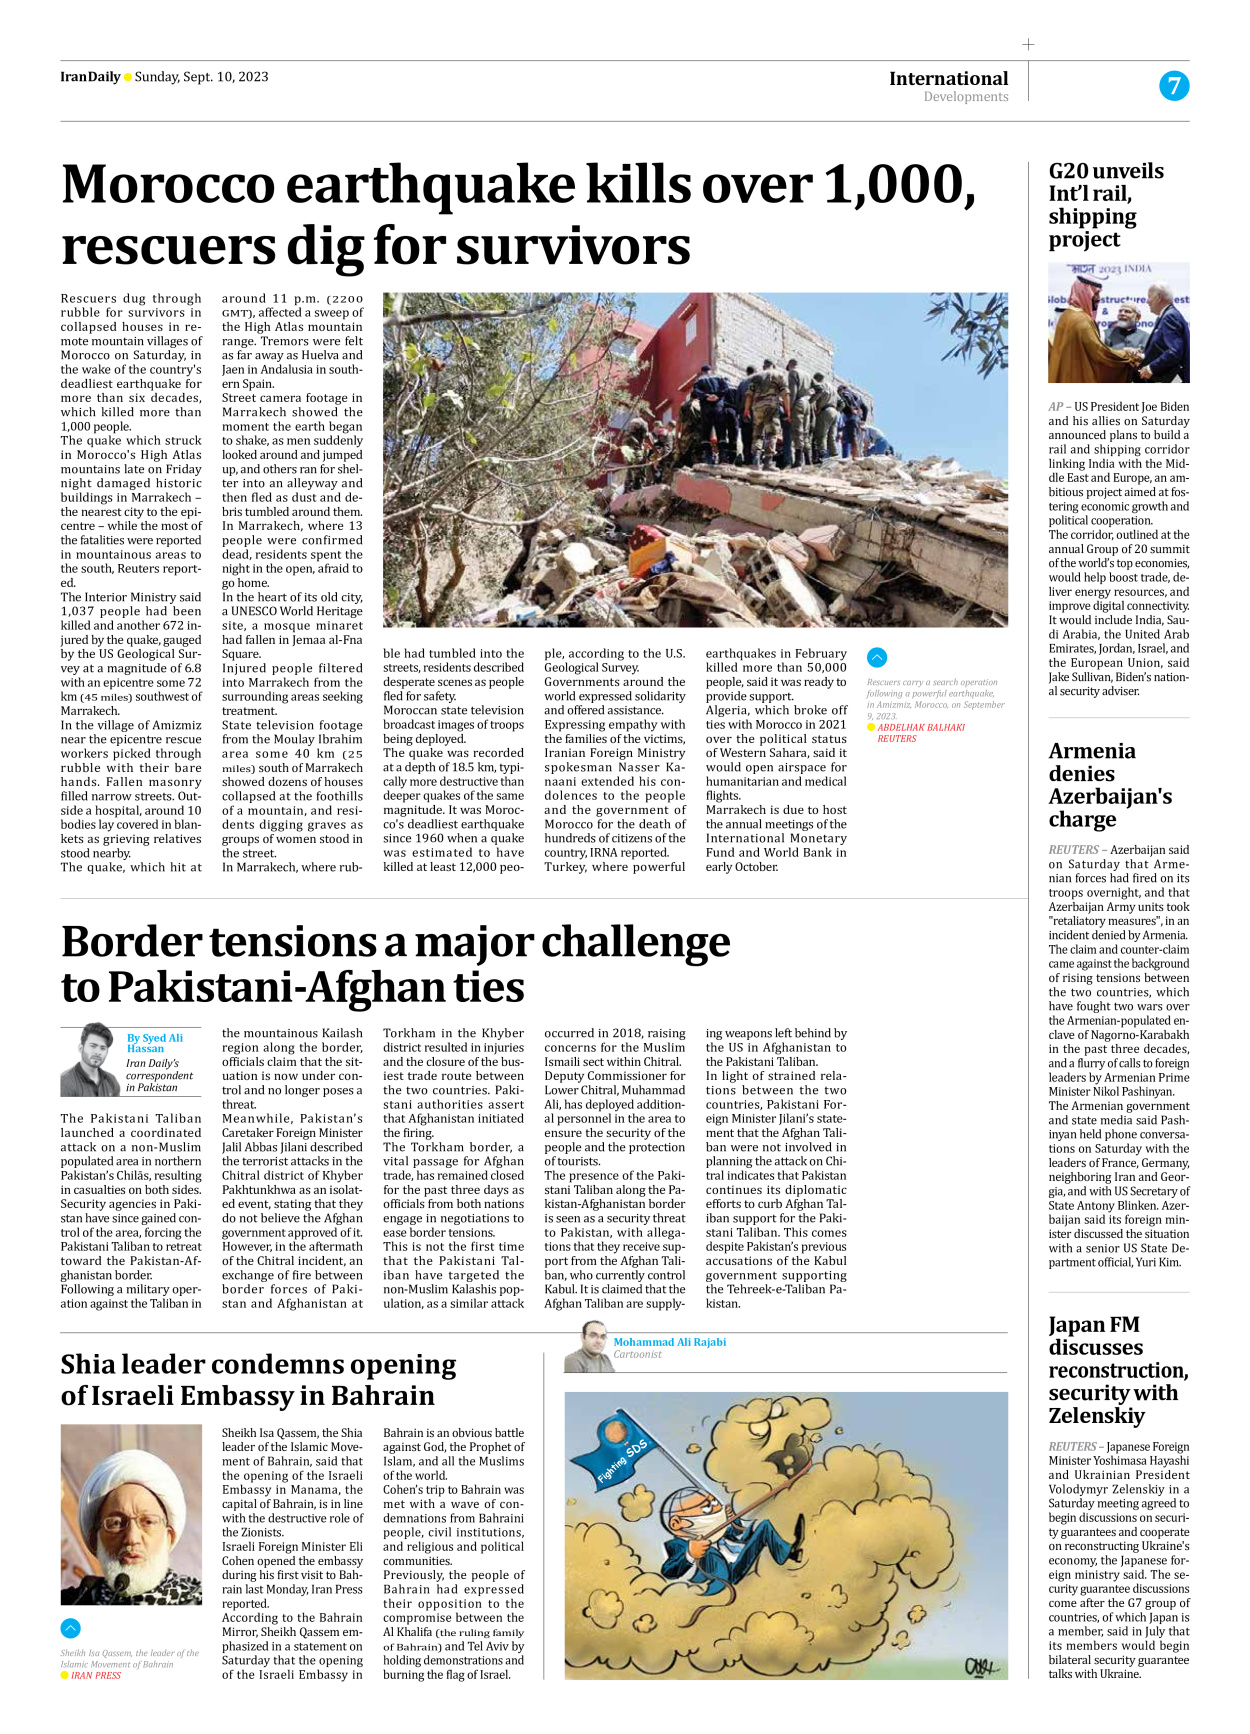 Iran Daily - Number Seven Thousand Three Hundred and Eighty Three - 10 September 2023 - Page 7